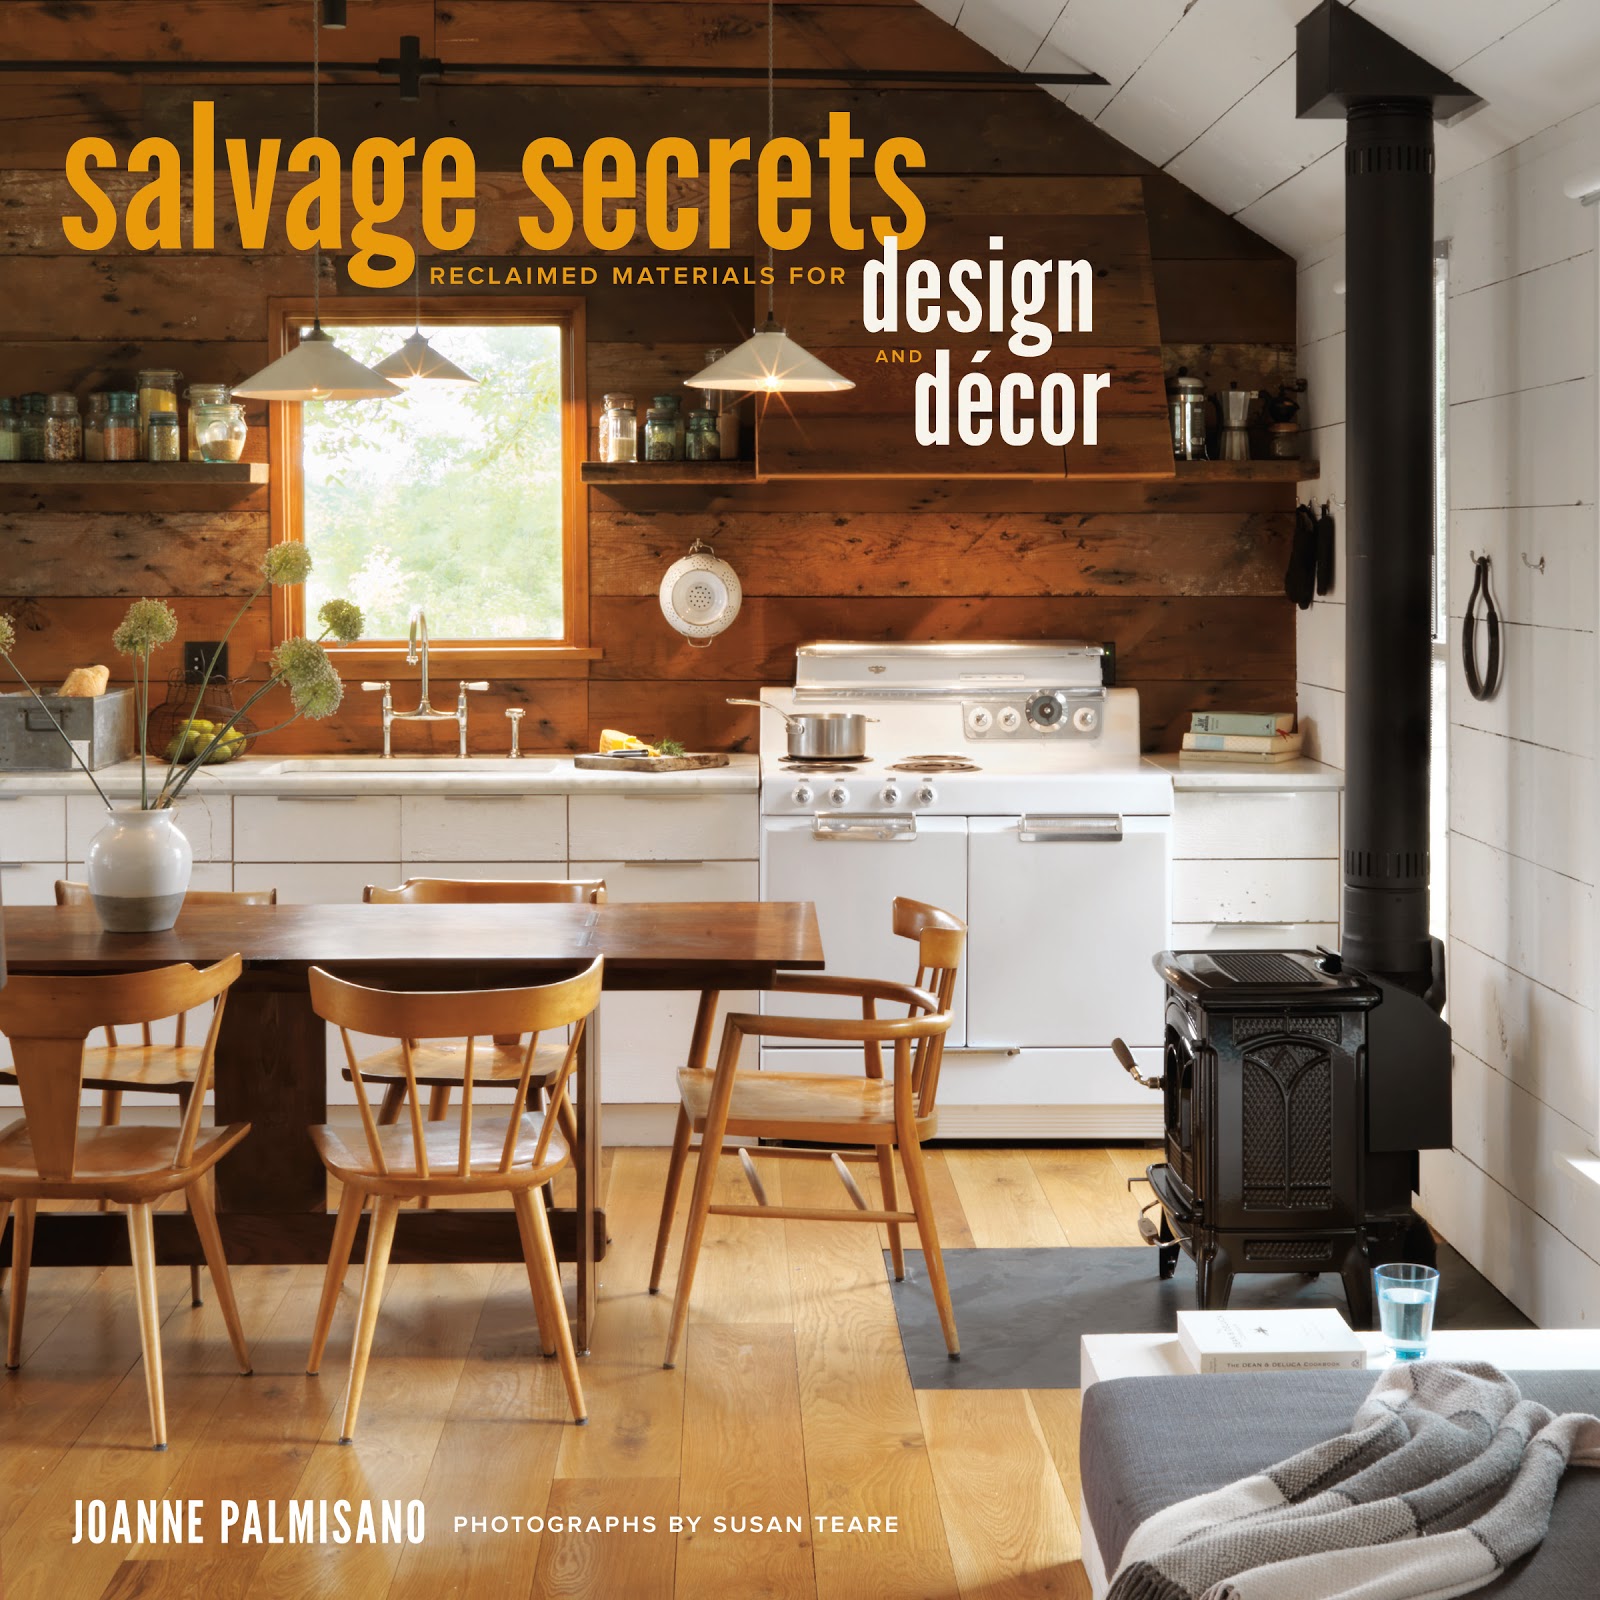 LOVE this book, Salvage Secrets Design and Decor. Enter to win a copy!